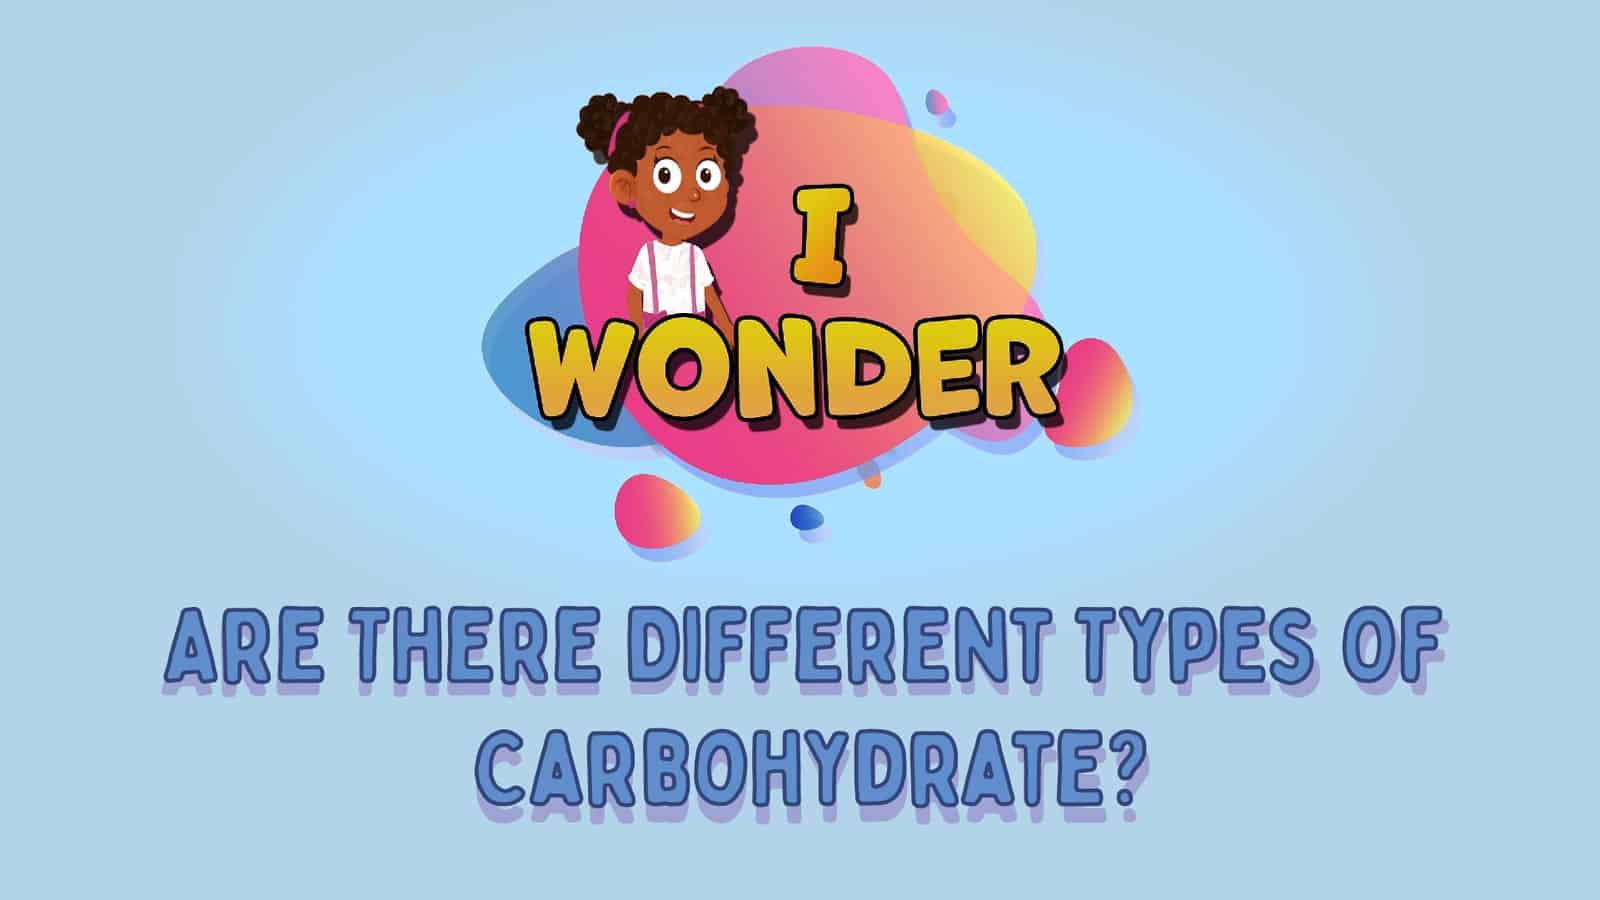 Are There Different Types Of Carbohydrate?